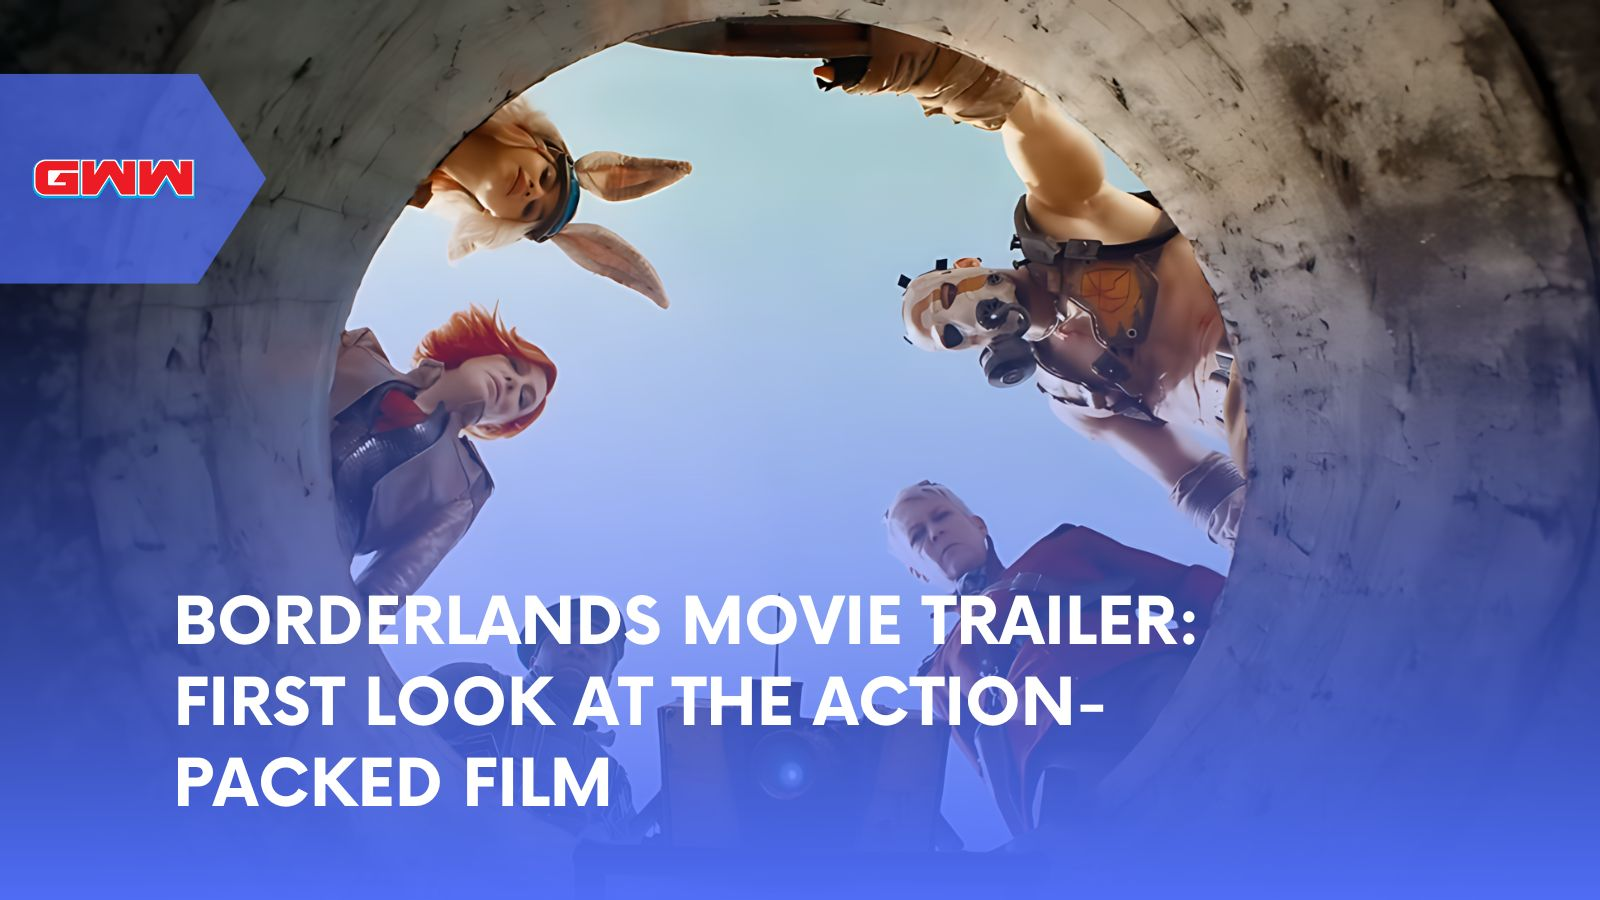 Borderlands Movie Trailer: First Look at the Action-Packed Film